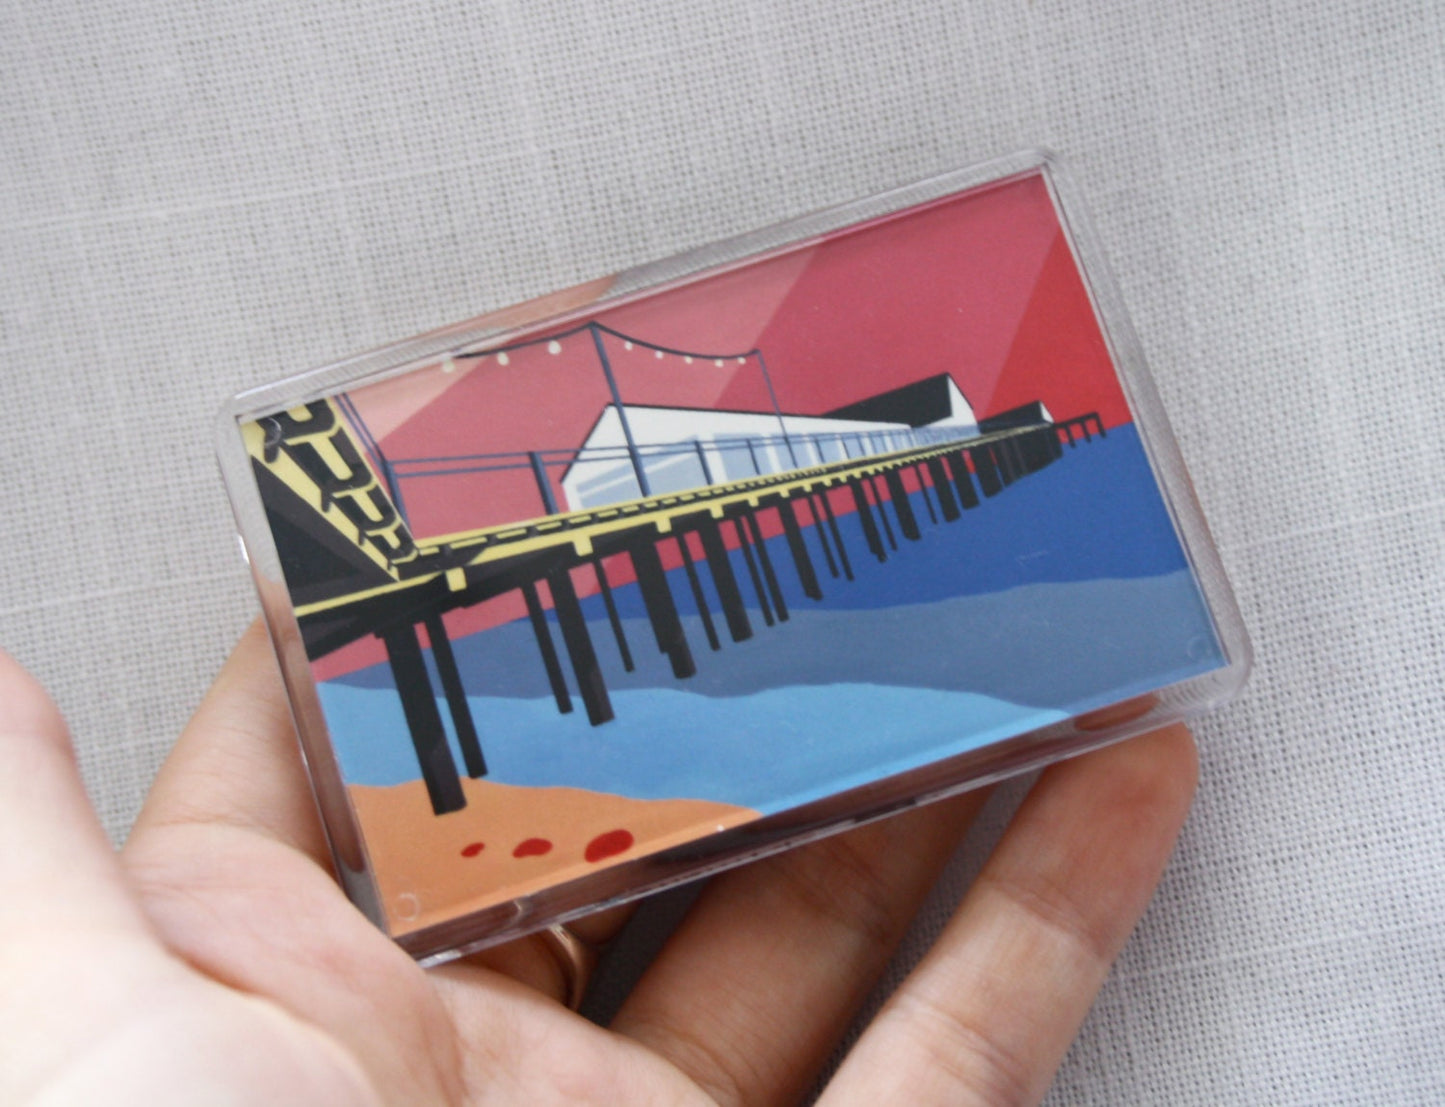 Southwold Pier themed Fridge magnet 'Look up and Out' by Rebecca Pymar